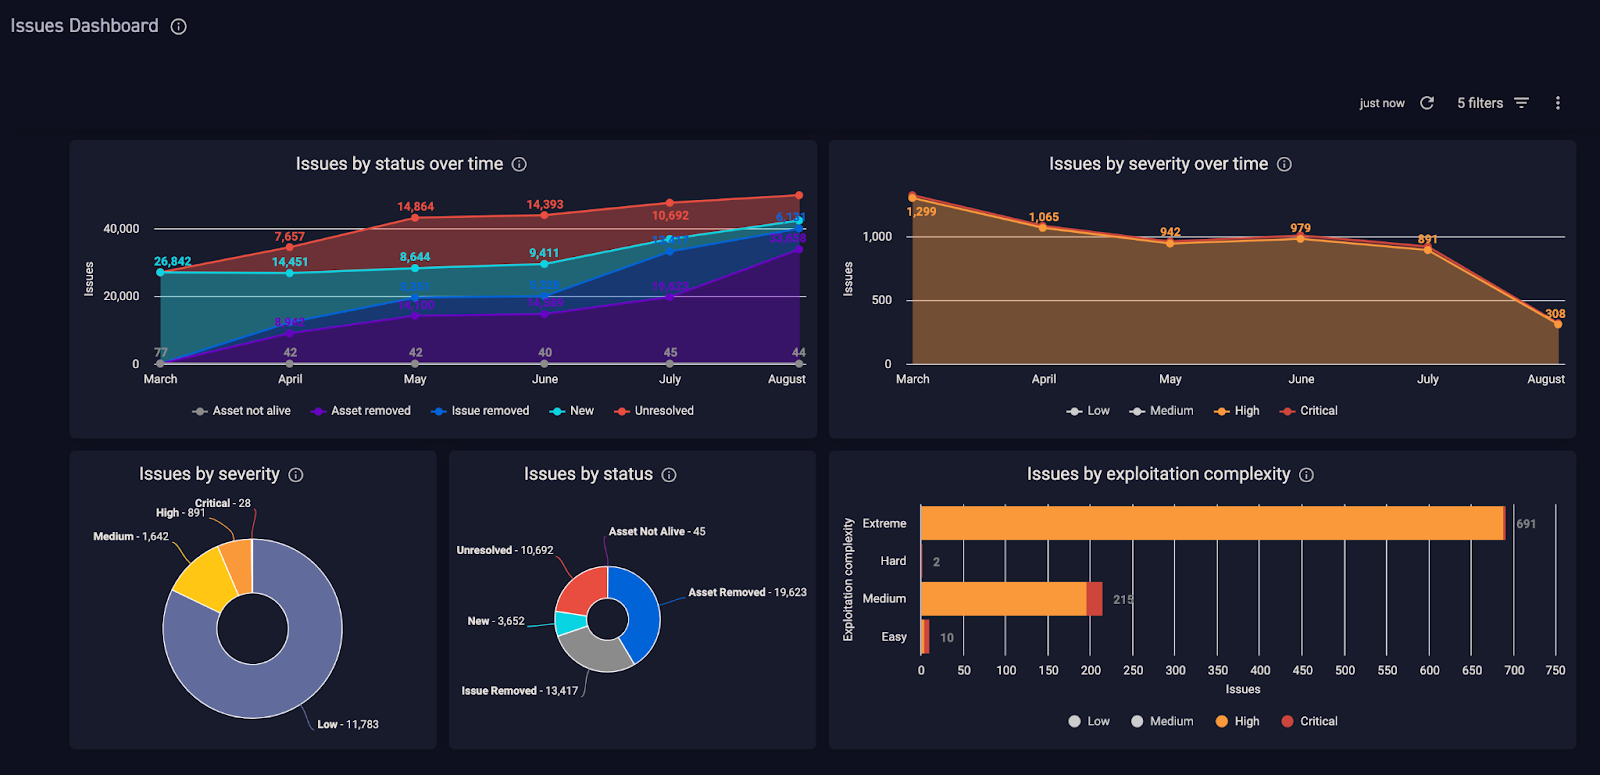 The CyCognito platform’s Issue Dashboard shows several ways to evaluate issues, including severity, status, and exploitation complexity.